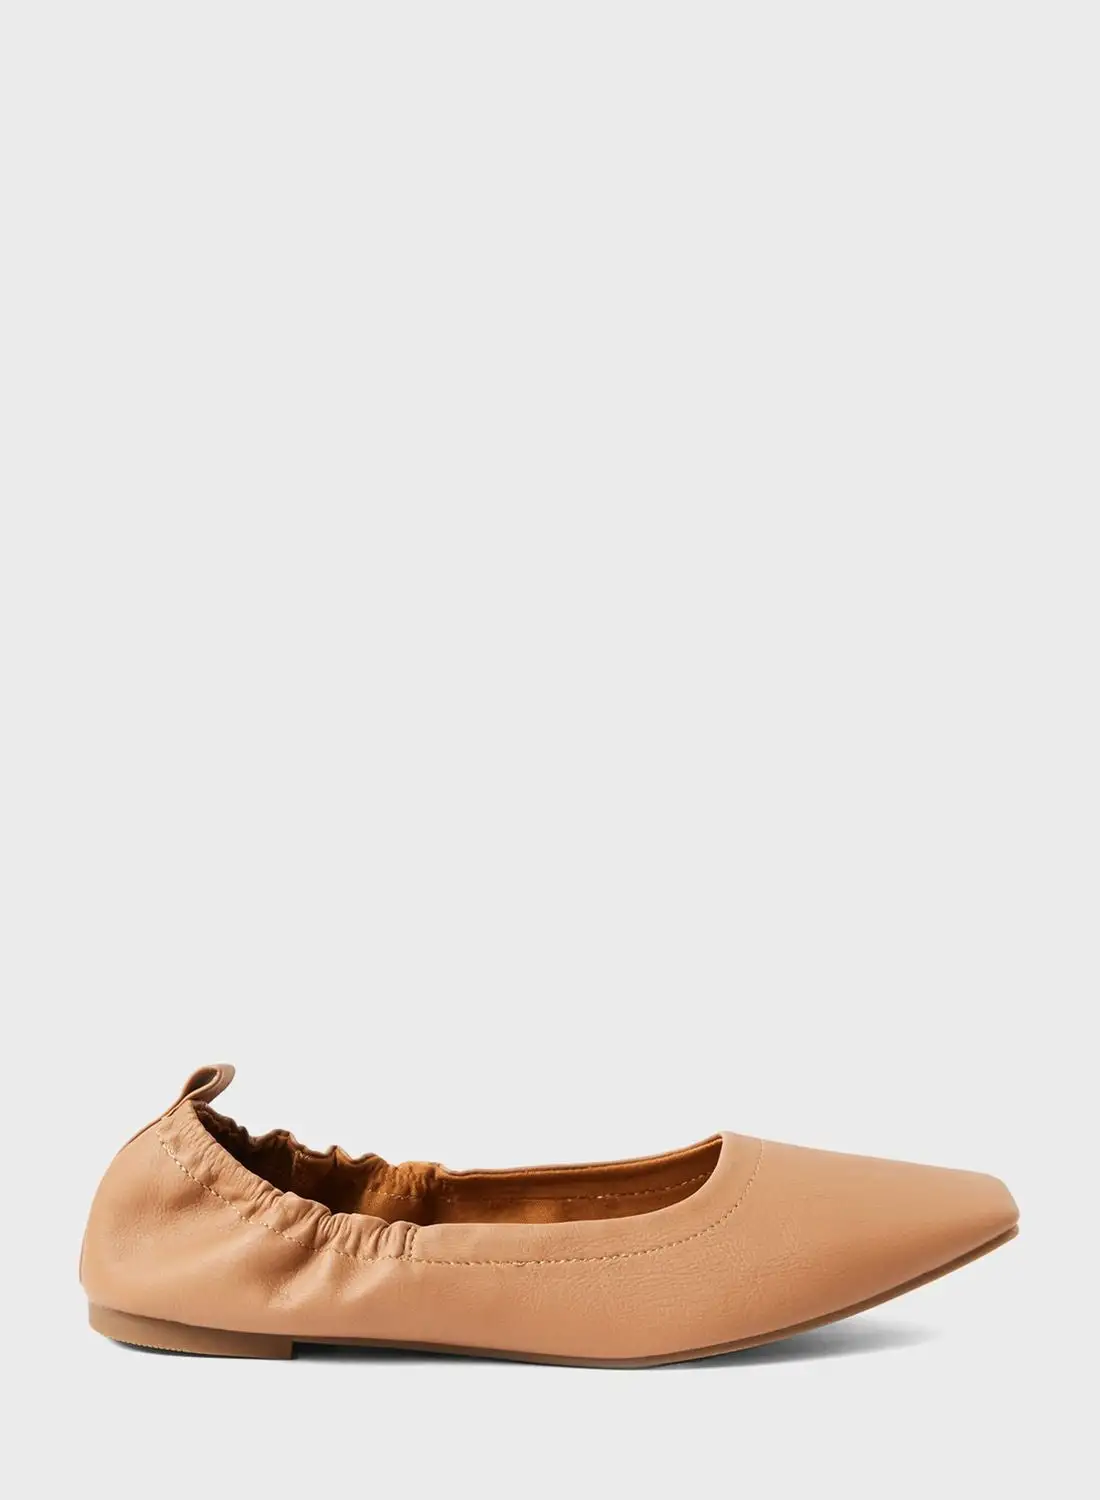 CALL IT SPRING Chenelle Vegan Leather Ballerinas